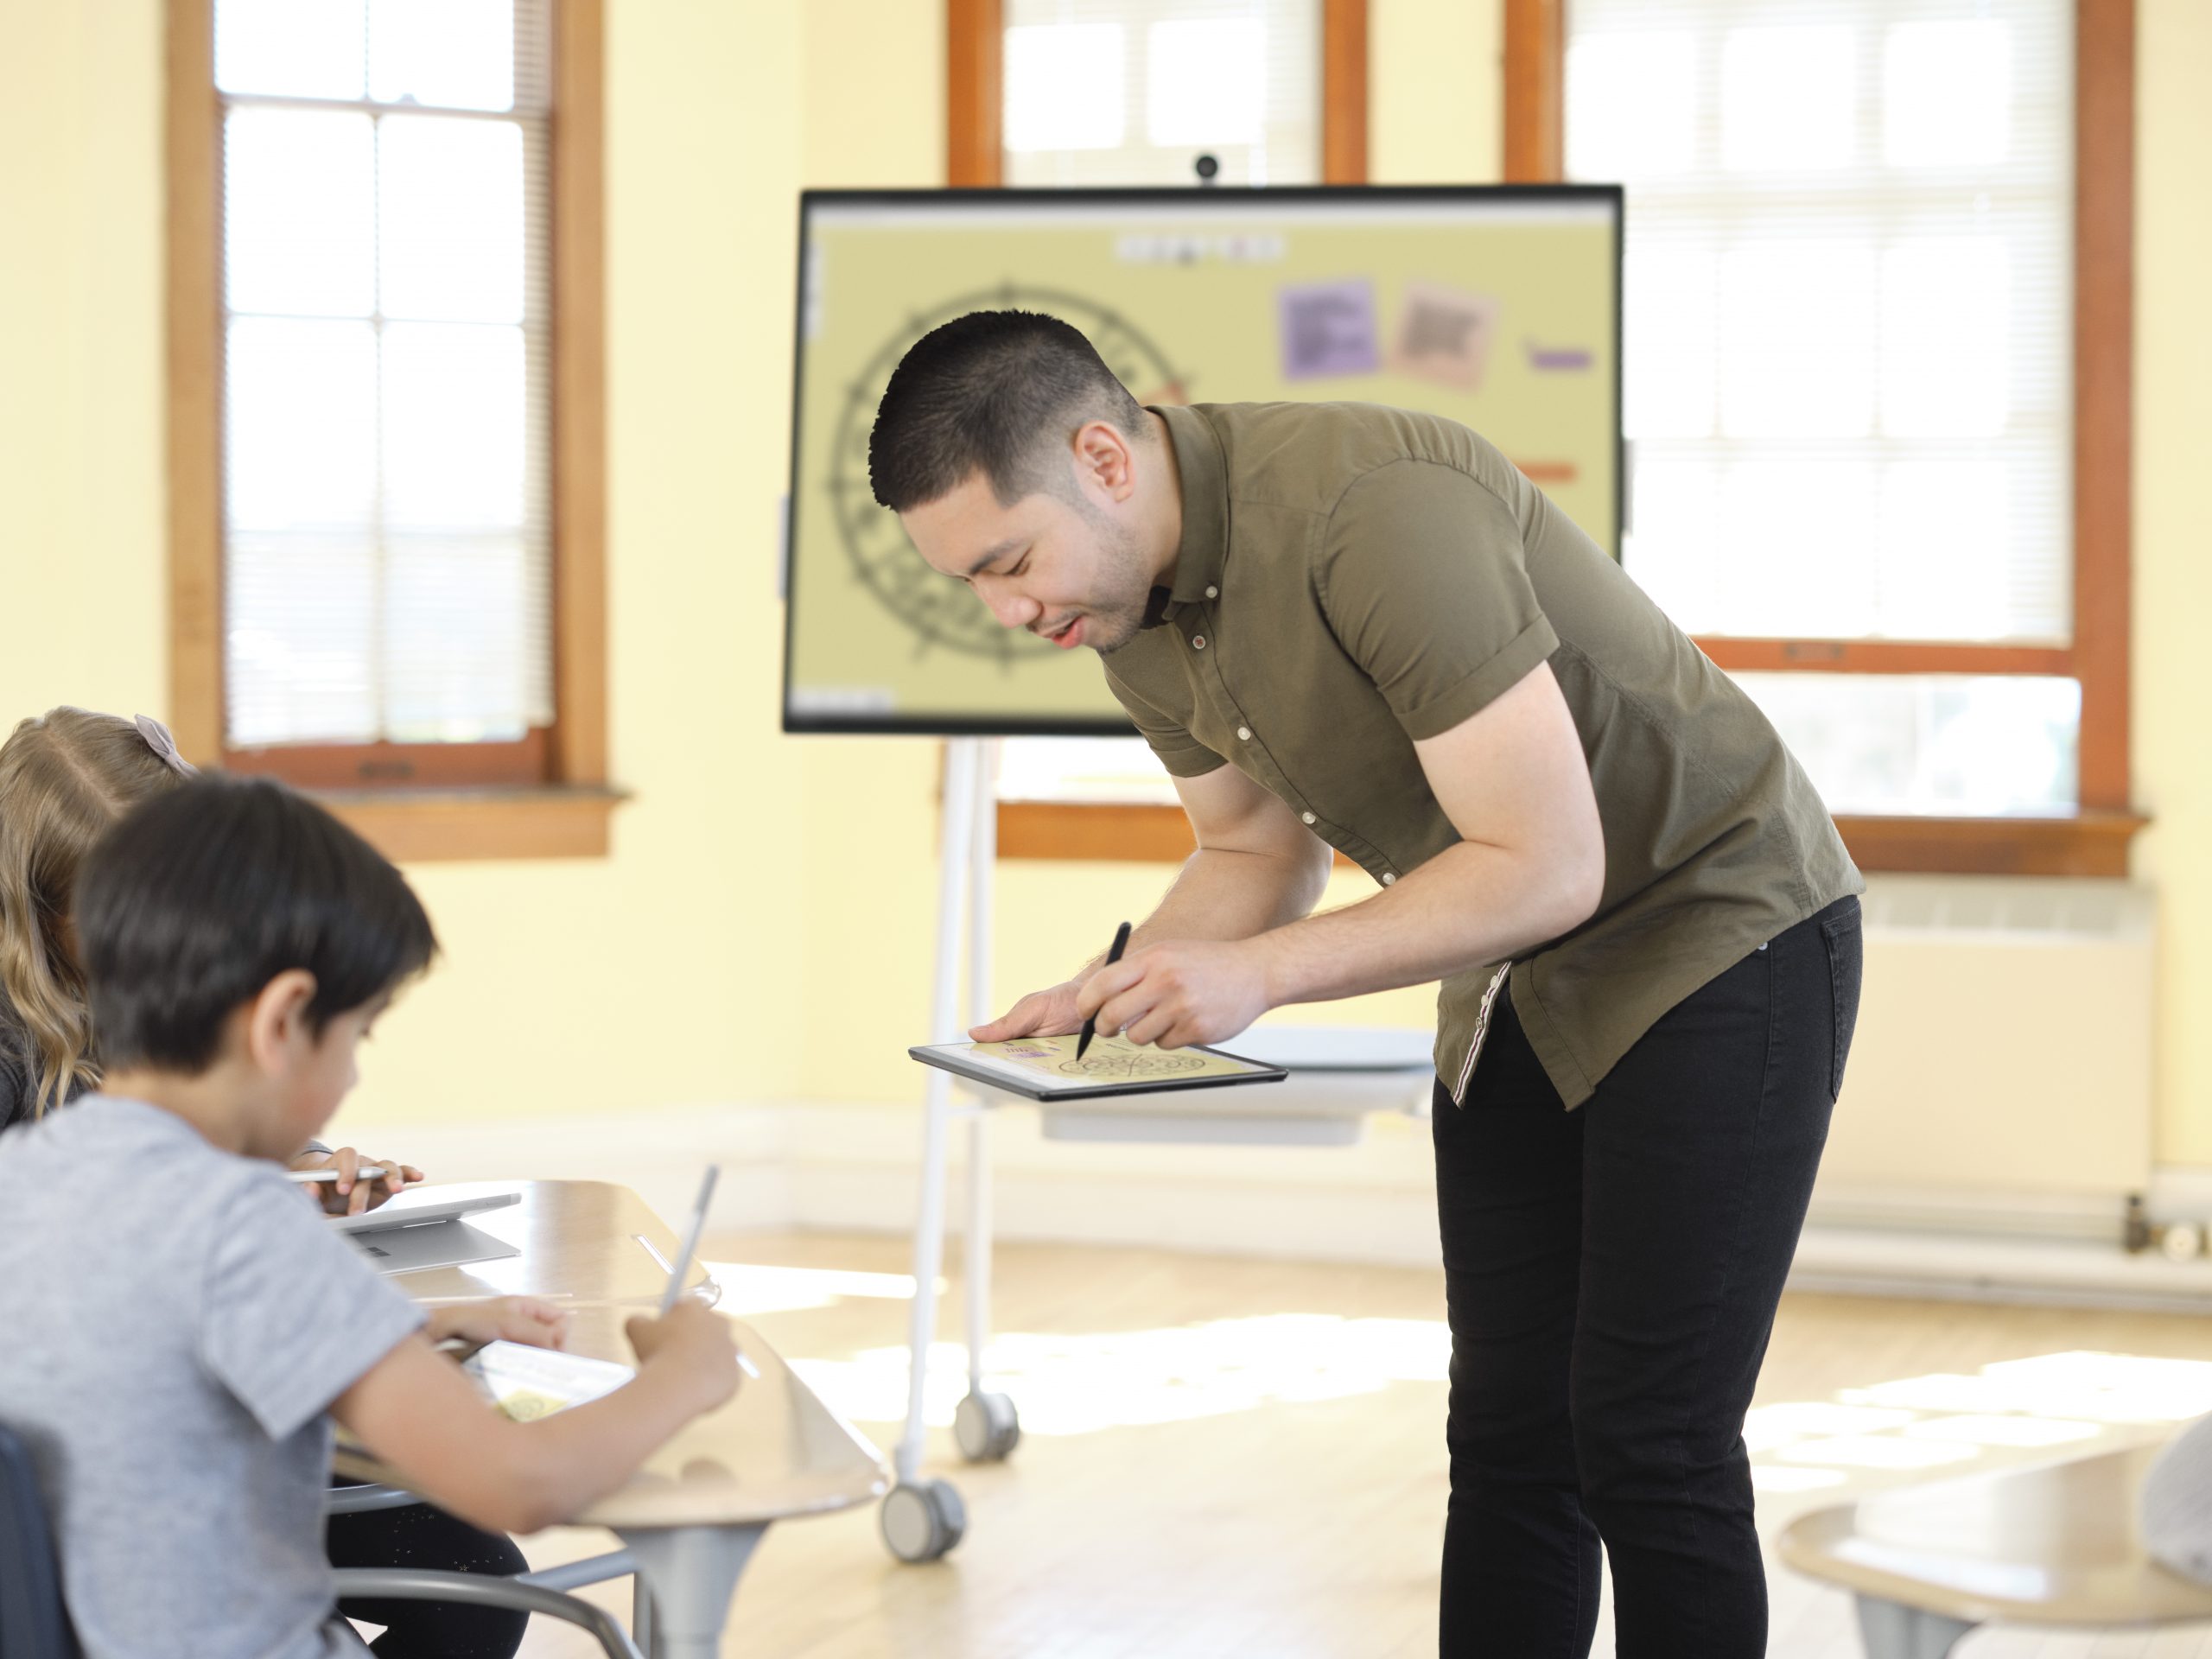 Asian male teacher instructing students inside a classroom using a Microsoft tablet